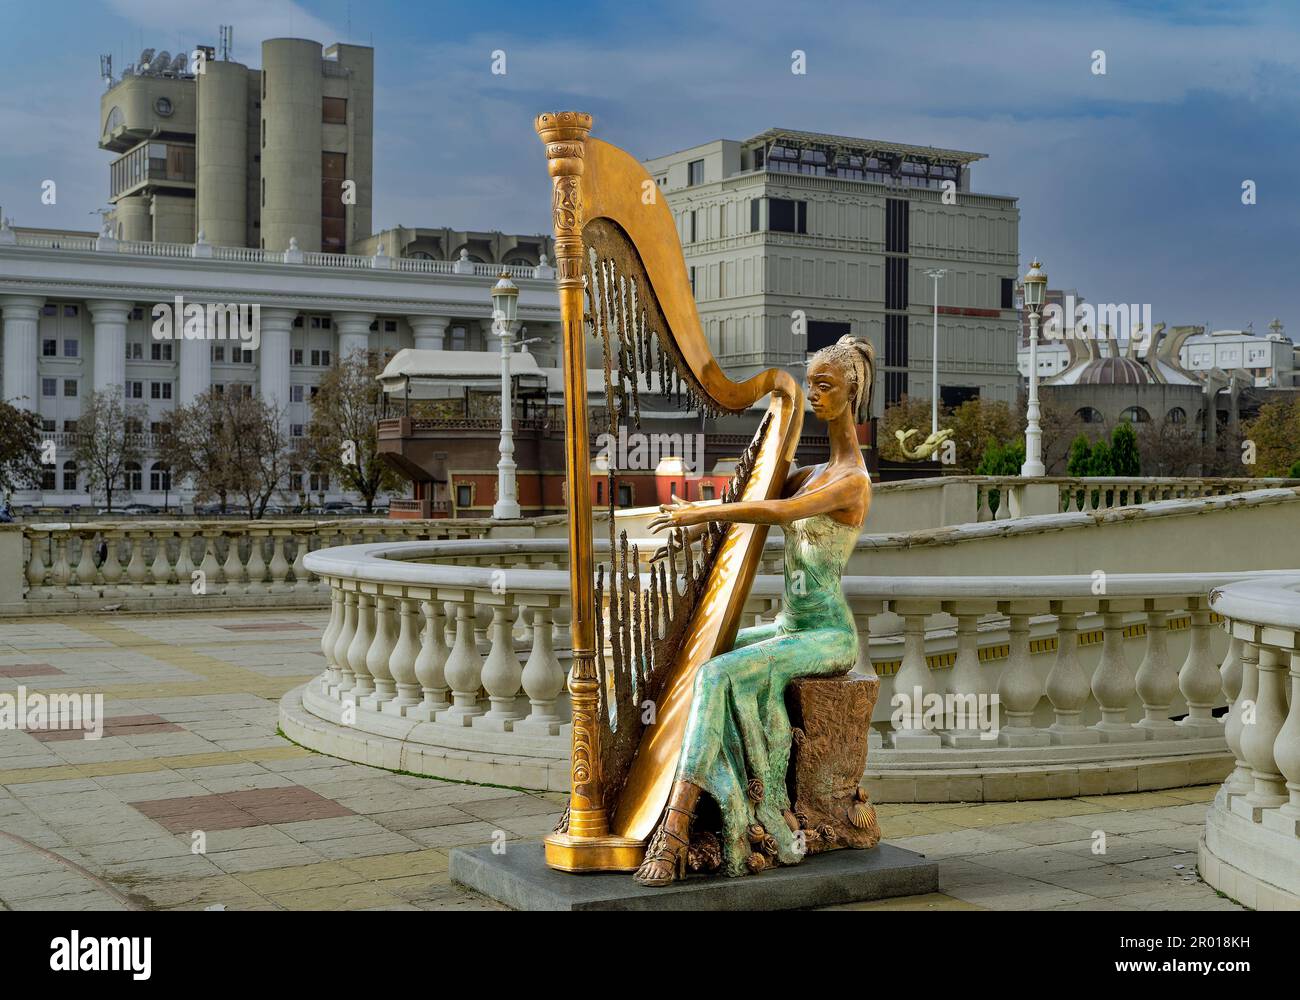 Macedonian National theater with statue of female harp player situated in front of it Stock Photo